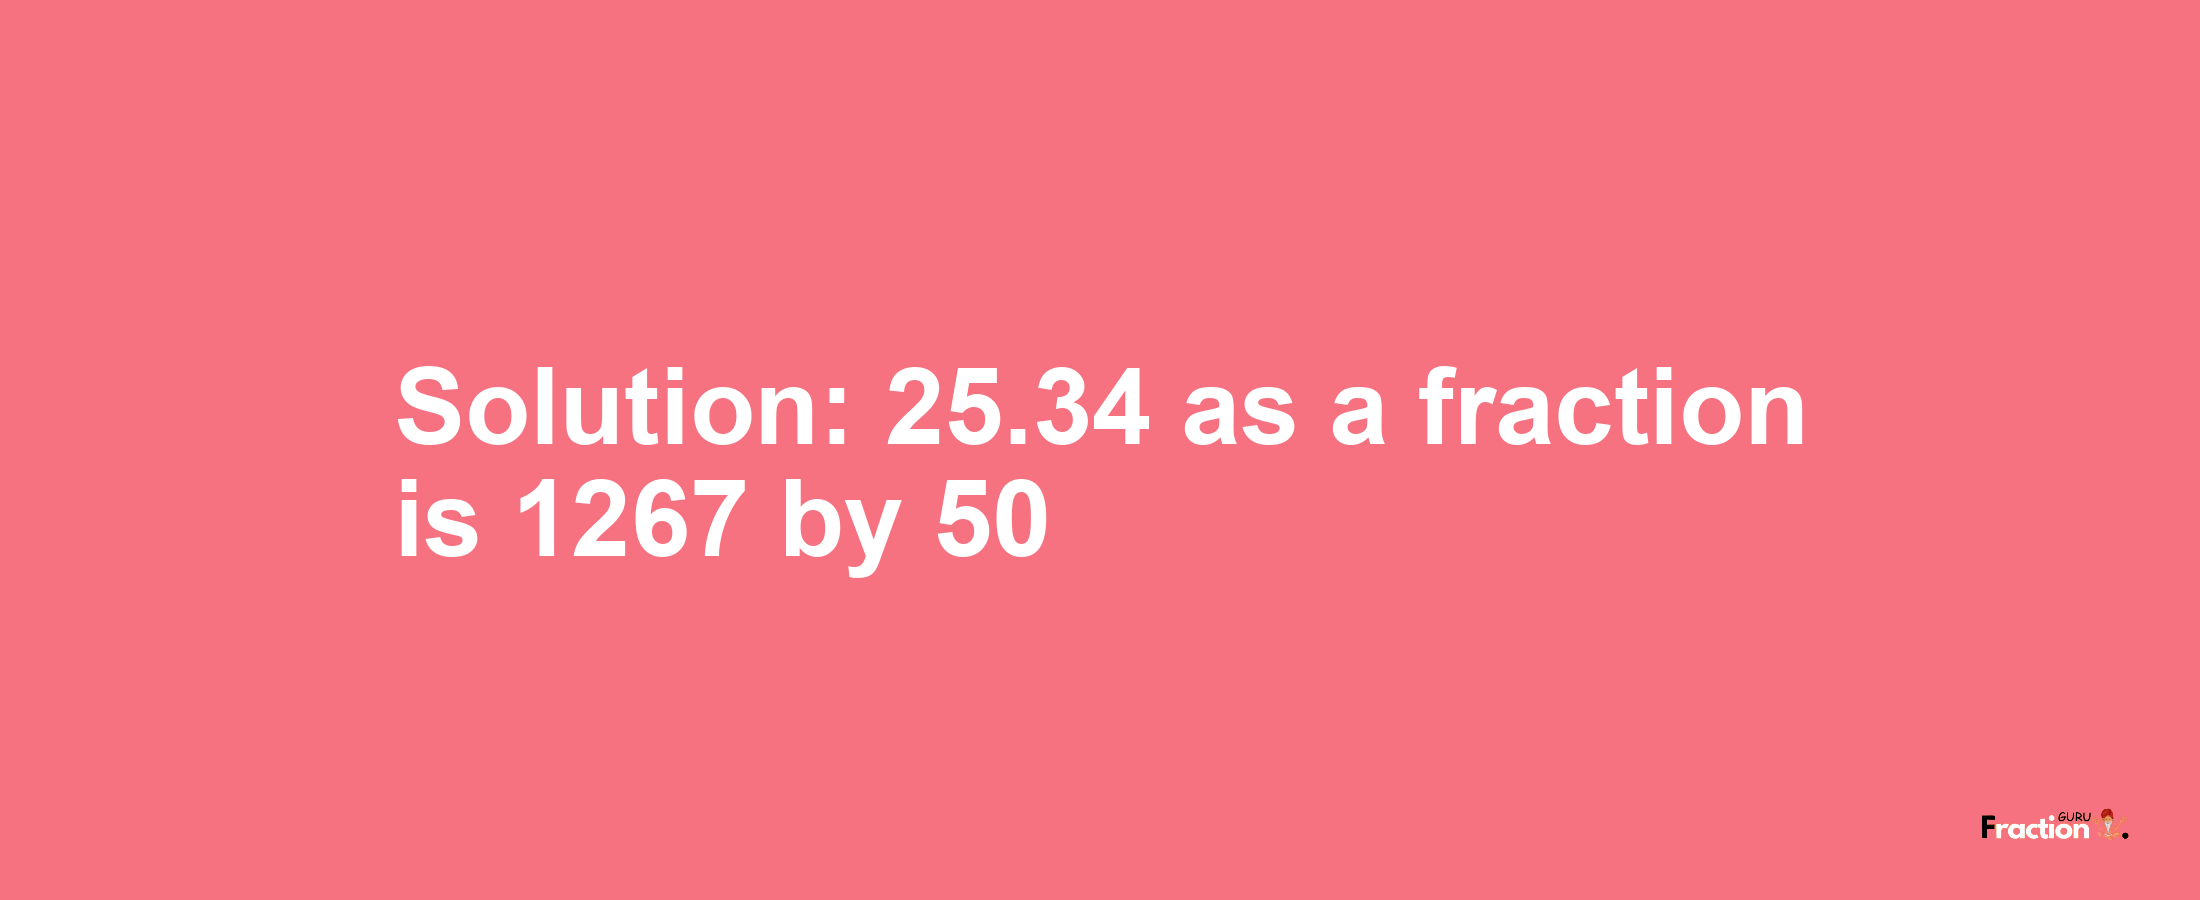 Solution:25.34 as a fraction is 1267/50